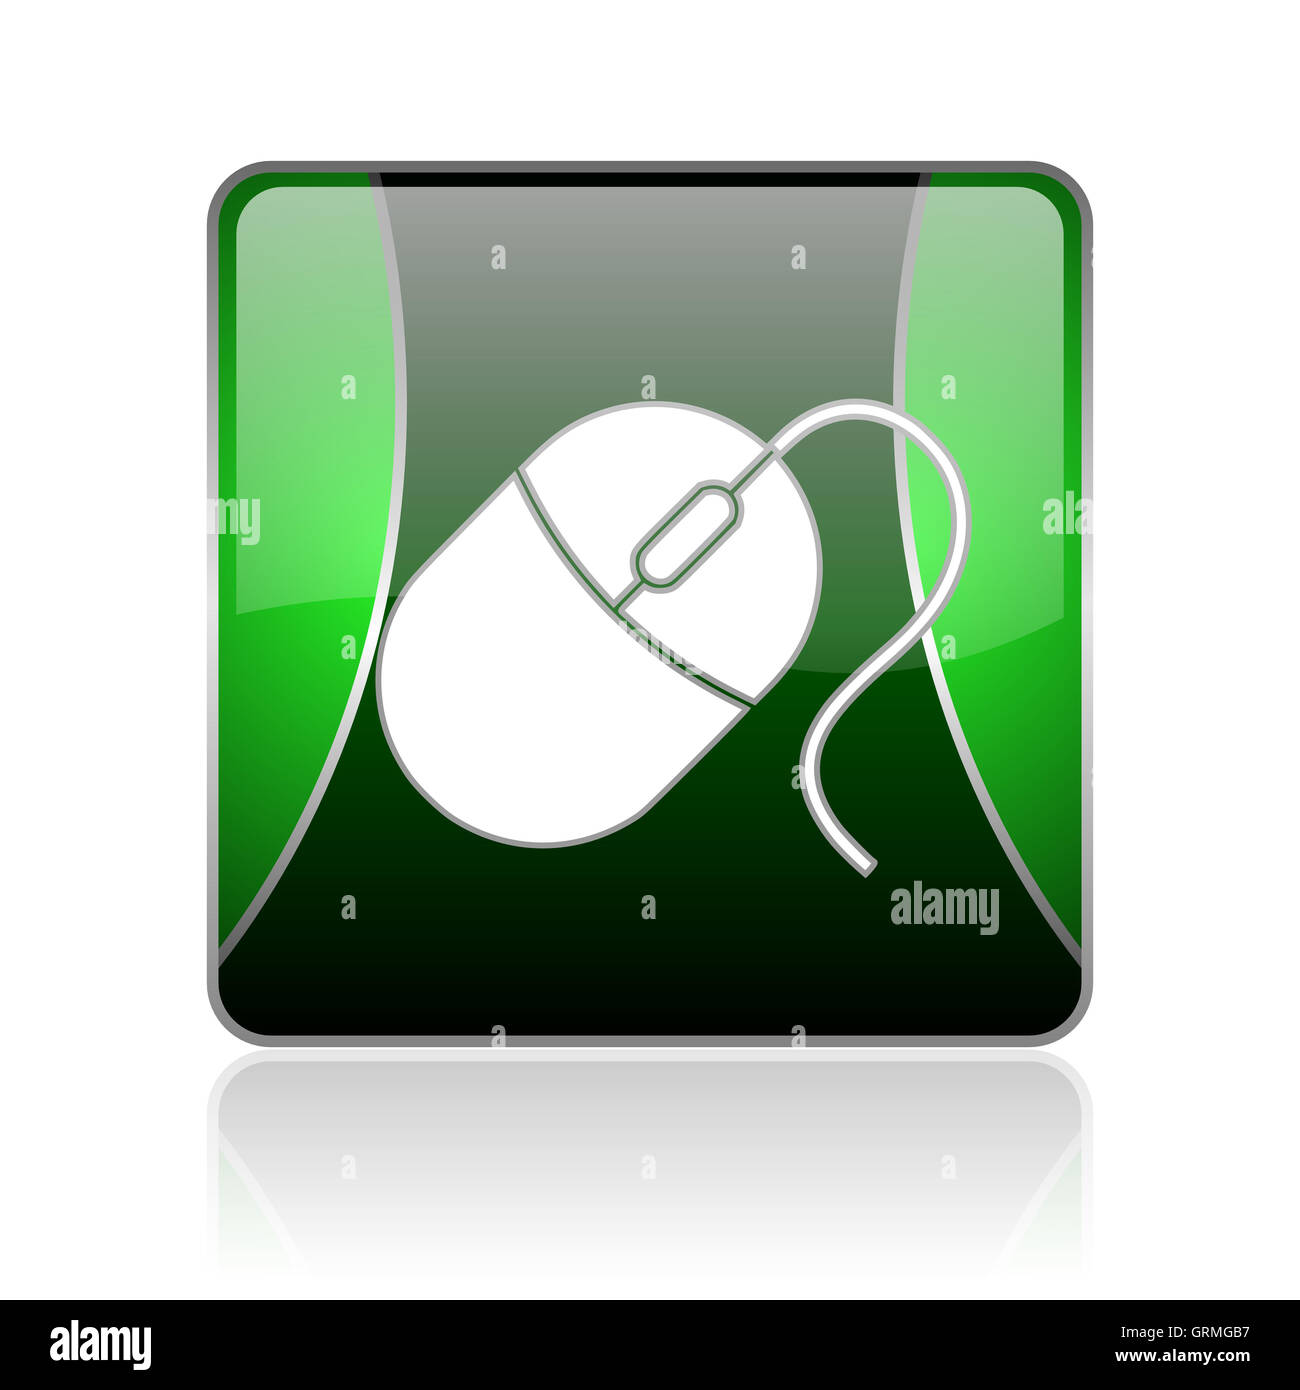 mouse black and green square web glossy icon Stock Photo